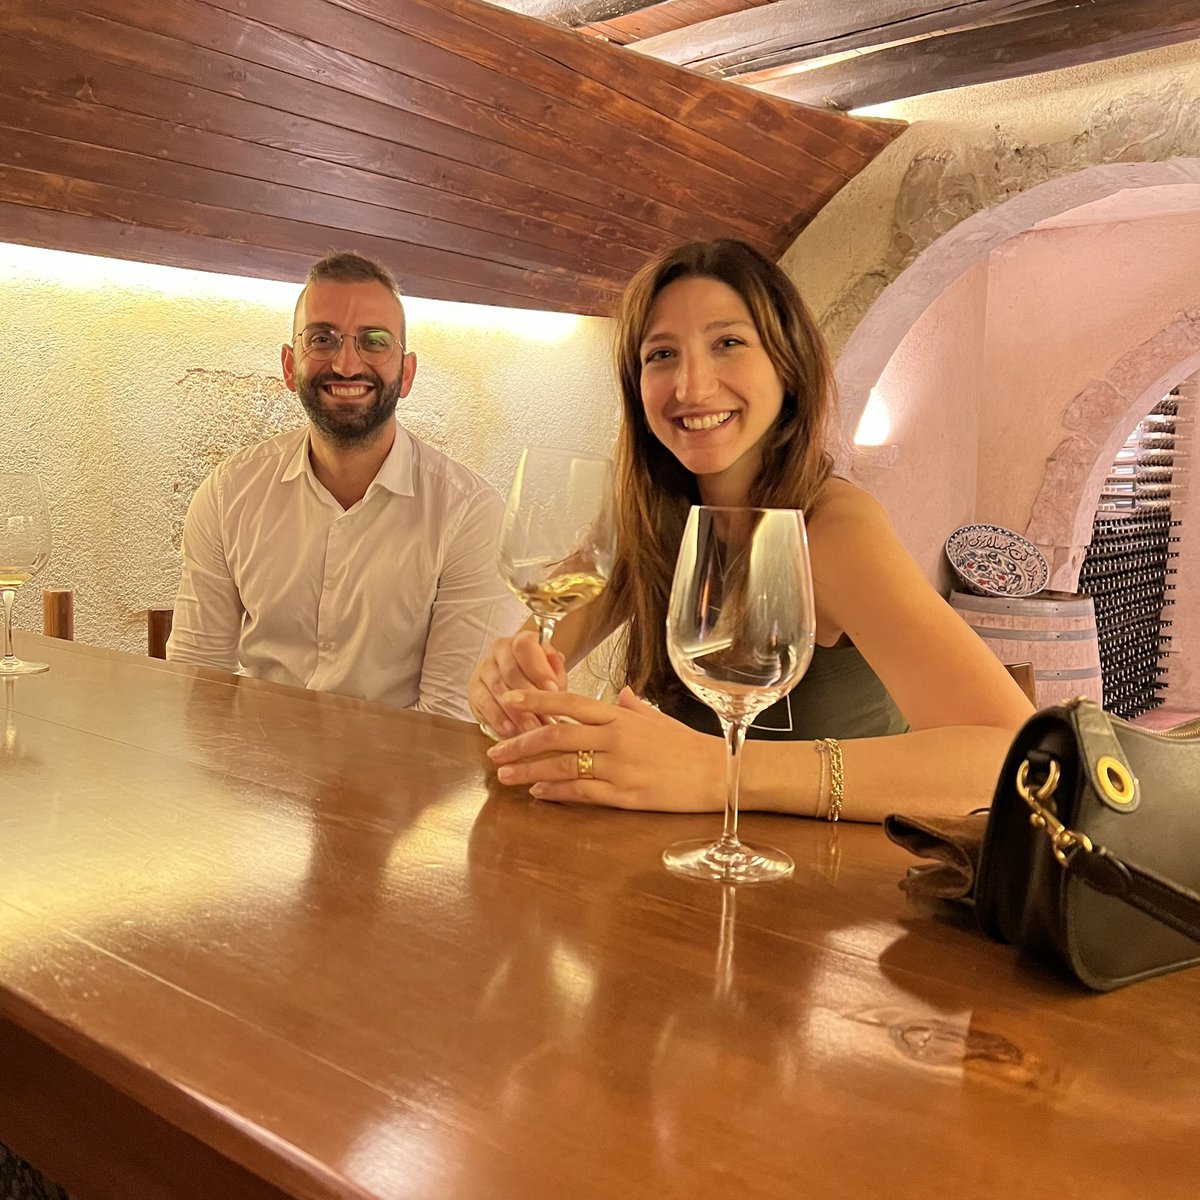 It was a pleasure to welcome you Tania & Julien 
Hope we will see you again on your next trip.

#wine  #winelovers #lebanesewineries #sommeliers #finewine #winetasting #vegan #winetourism #awardwinningwine #awardwinning #premiumwine #winesoflebanon  #lebanon #winelover #winetime